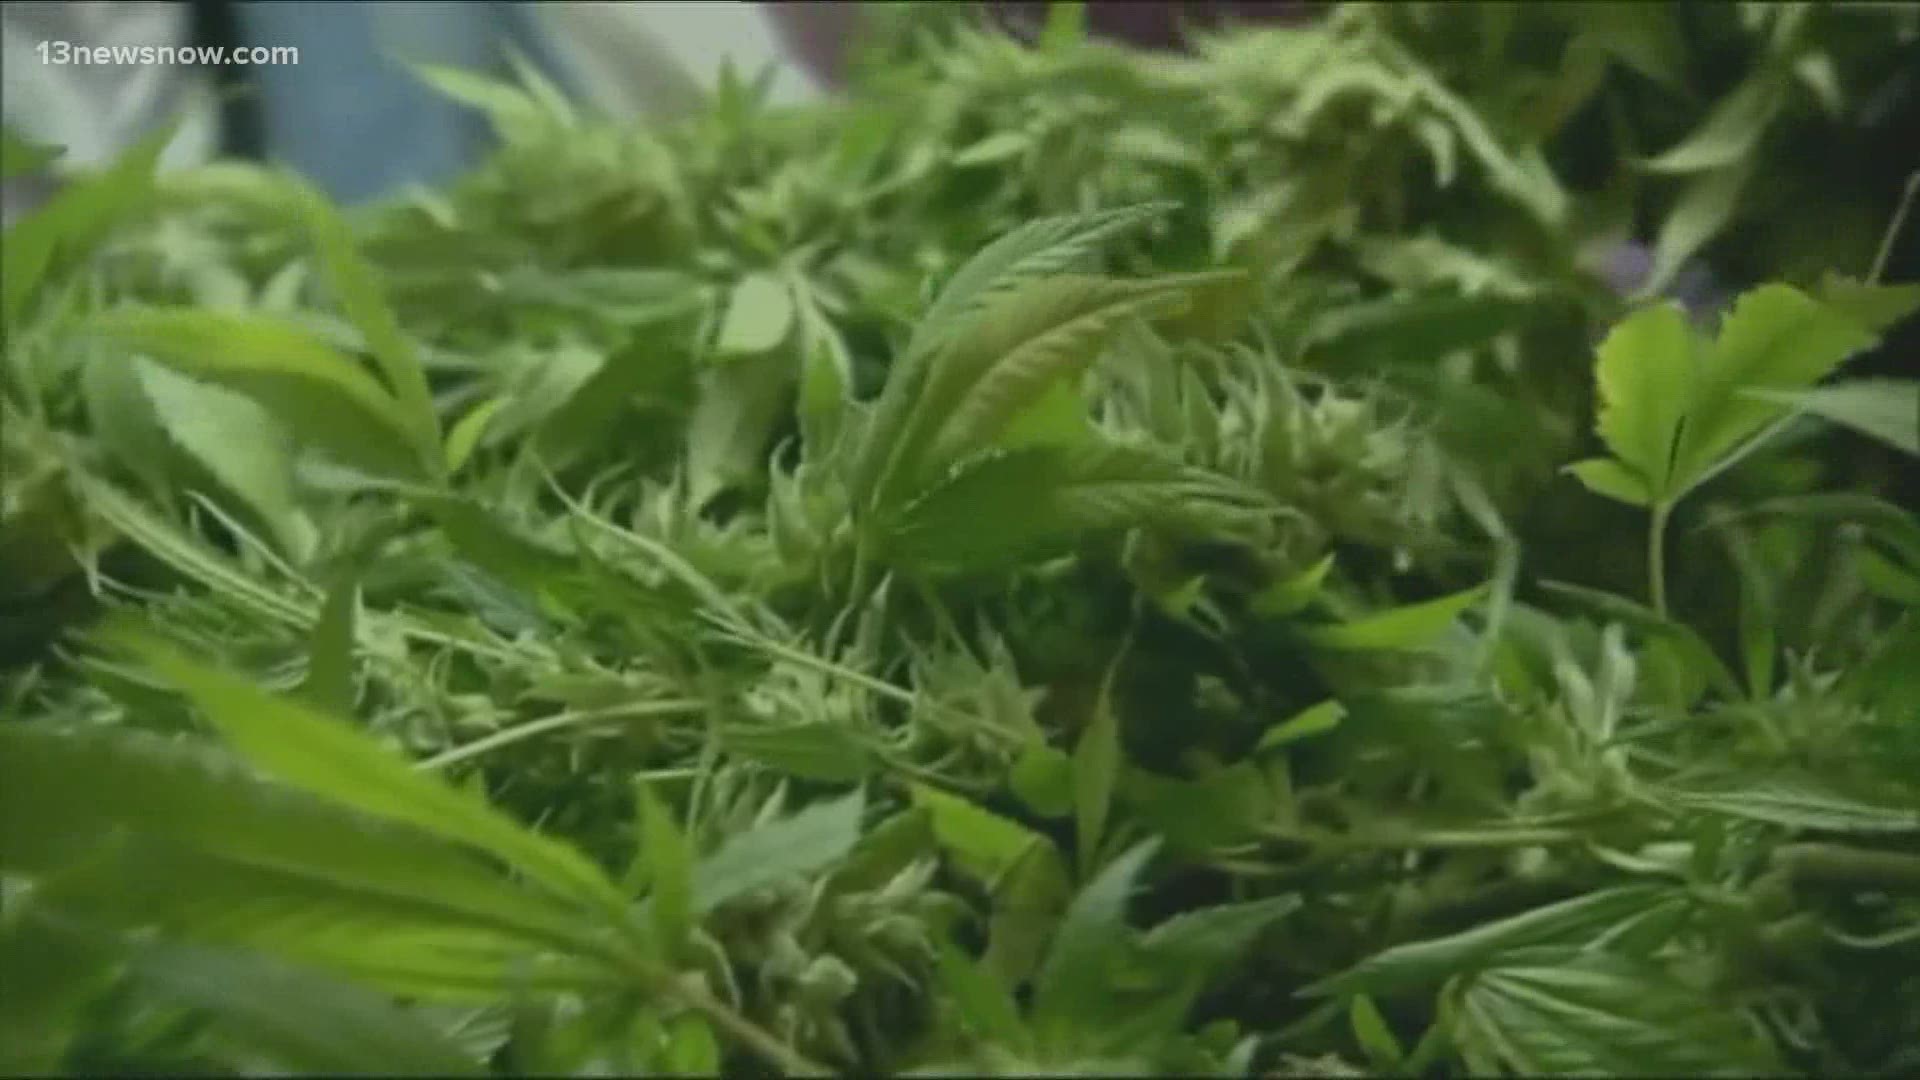 Governor Northam signed a bill that would make simple possession of marijuana legal in Virginia by July. 13News Now David Alan breaks down the historic measure.